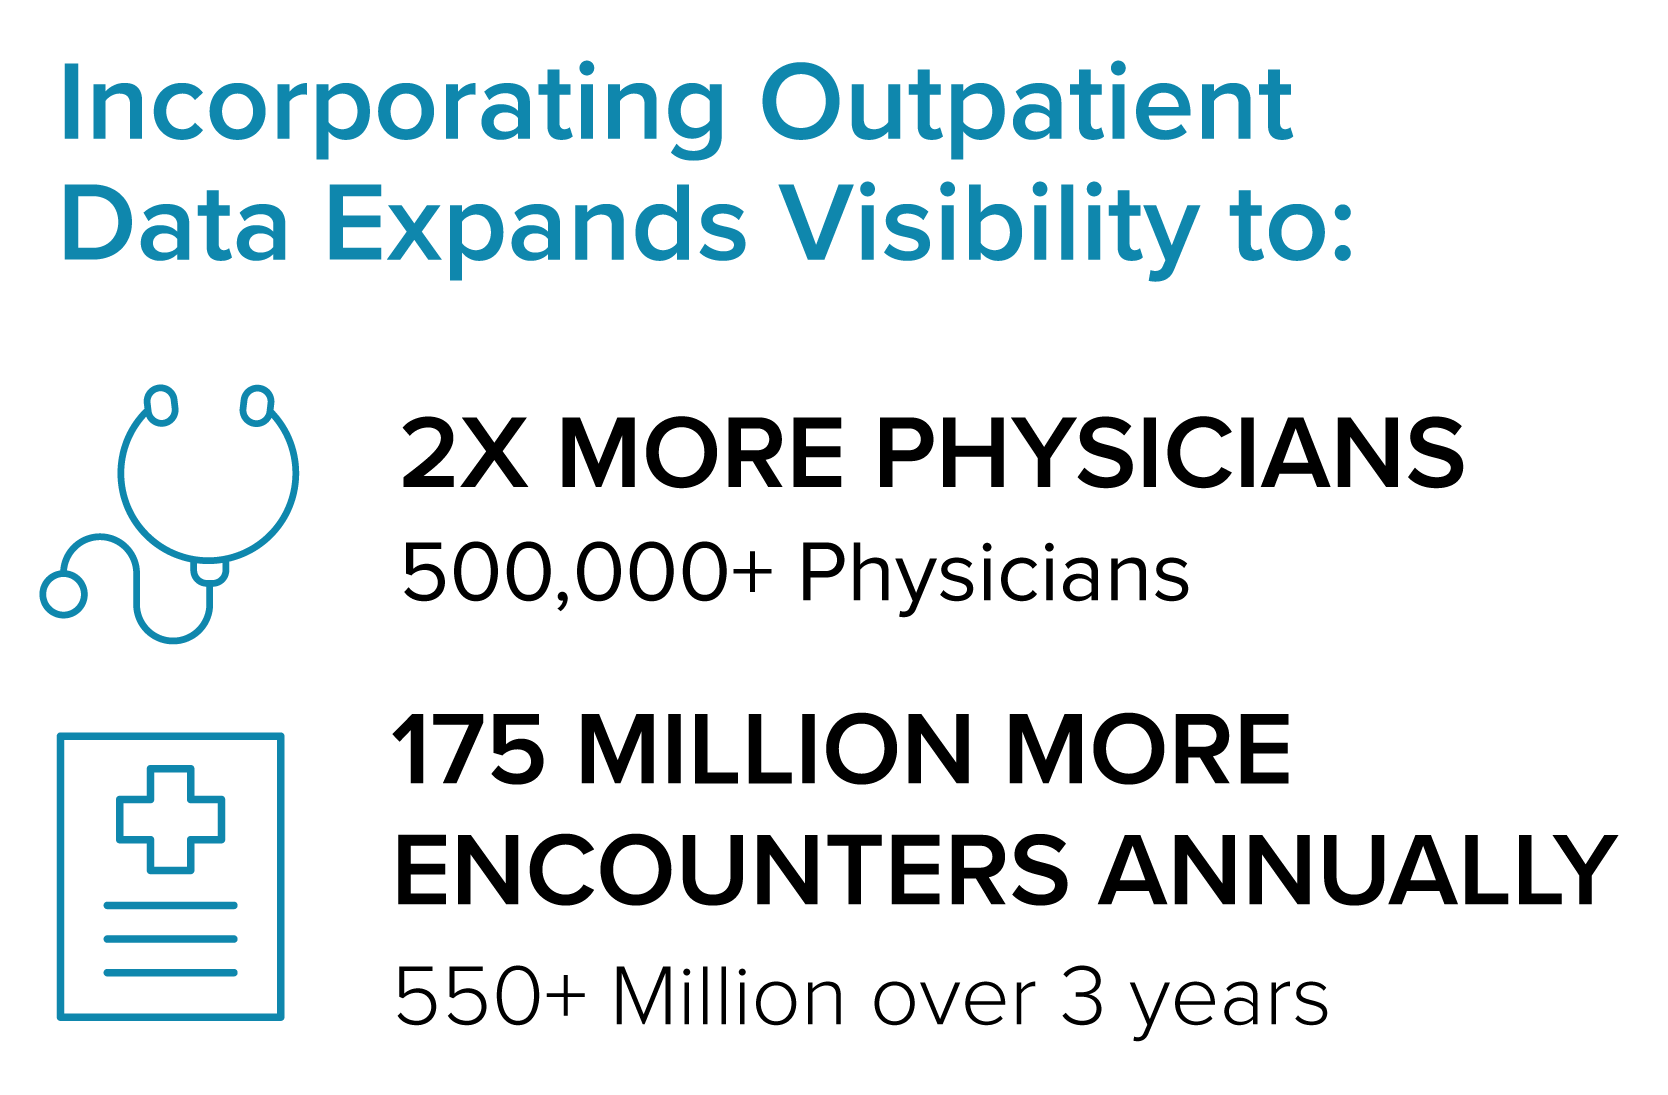 Incorporating Outpatient Data Expands Visibility:
• 2x more physicians (500,000+)
• 175 million more encounters annually (550+ million over 3 years)